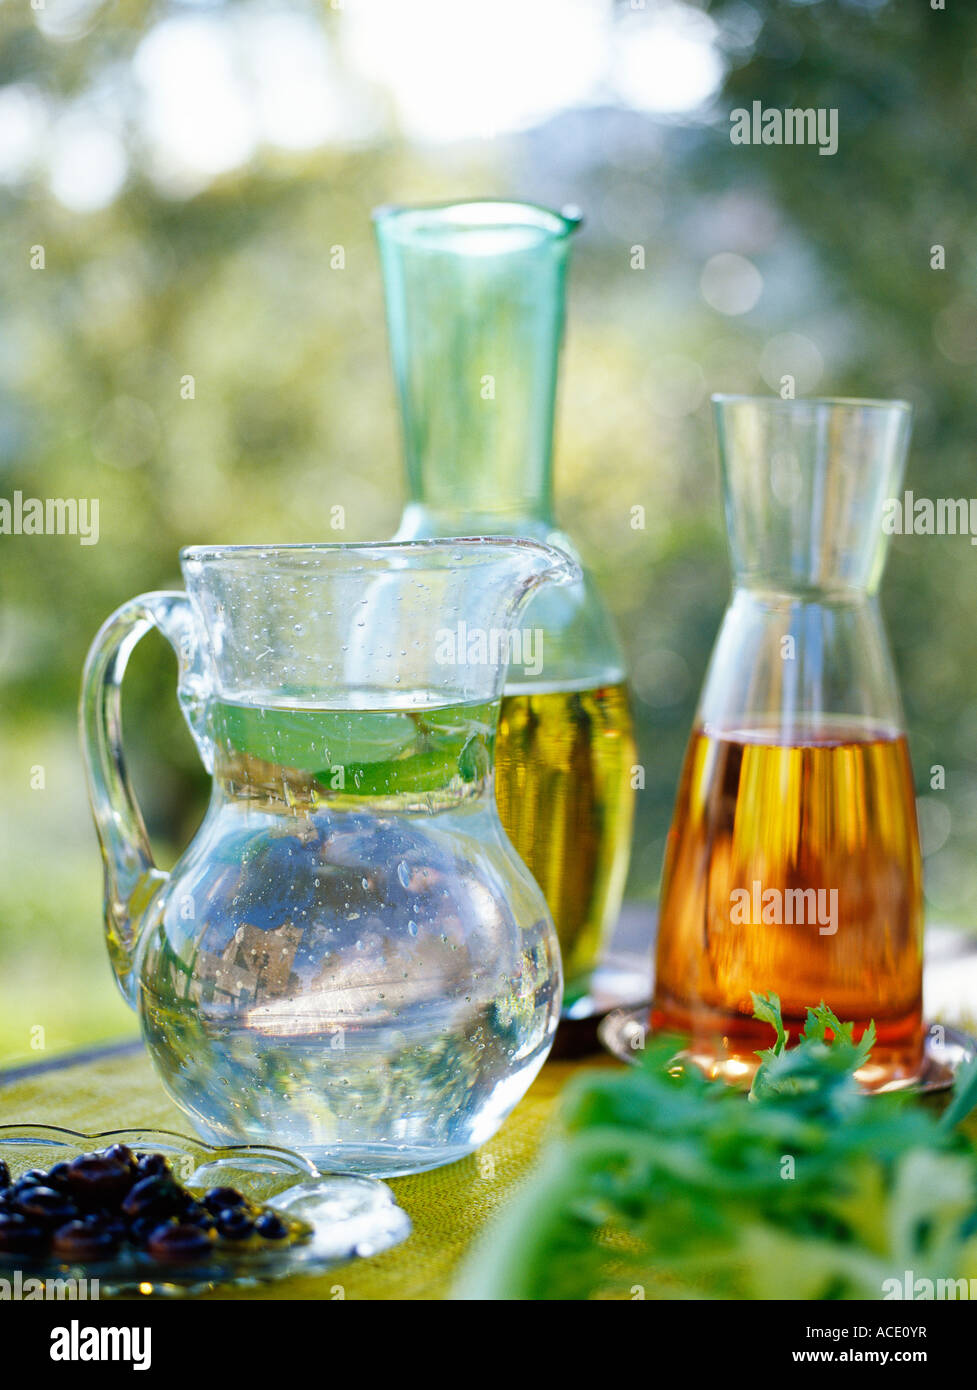 Water and wine in decanters close-up. Stock Photo